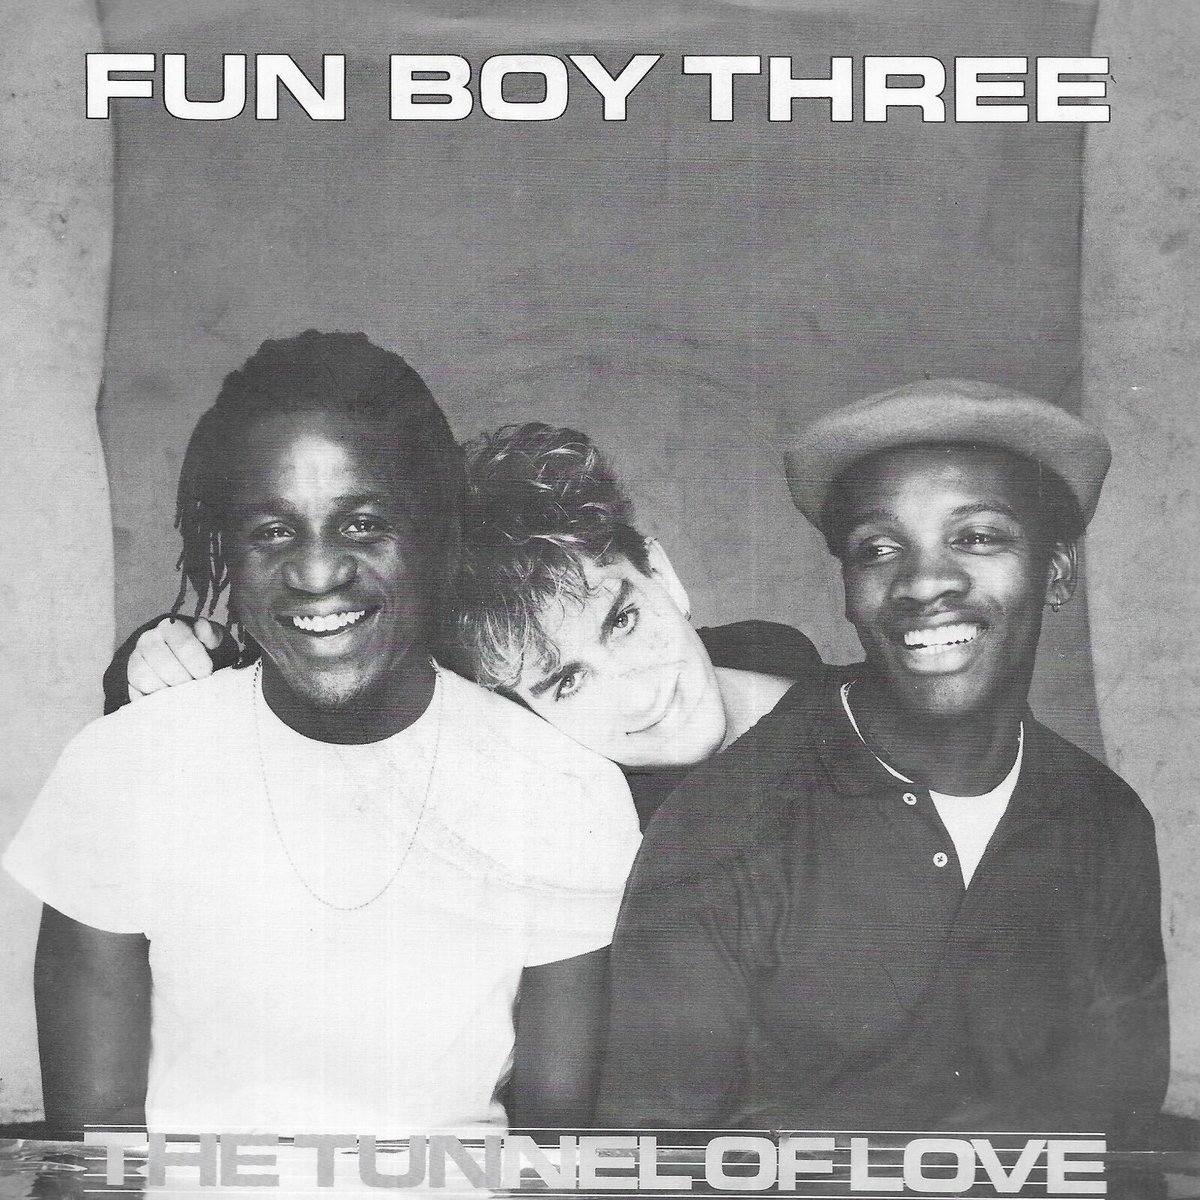 40 years ago today #FunBoyThree released the single 'THE TUNNEL OF LOVE'